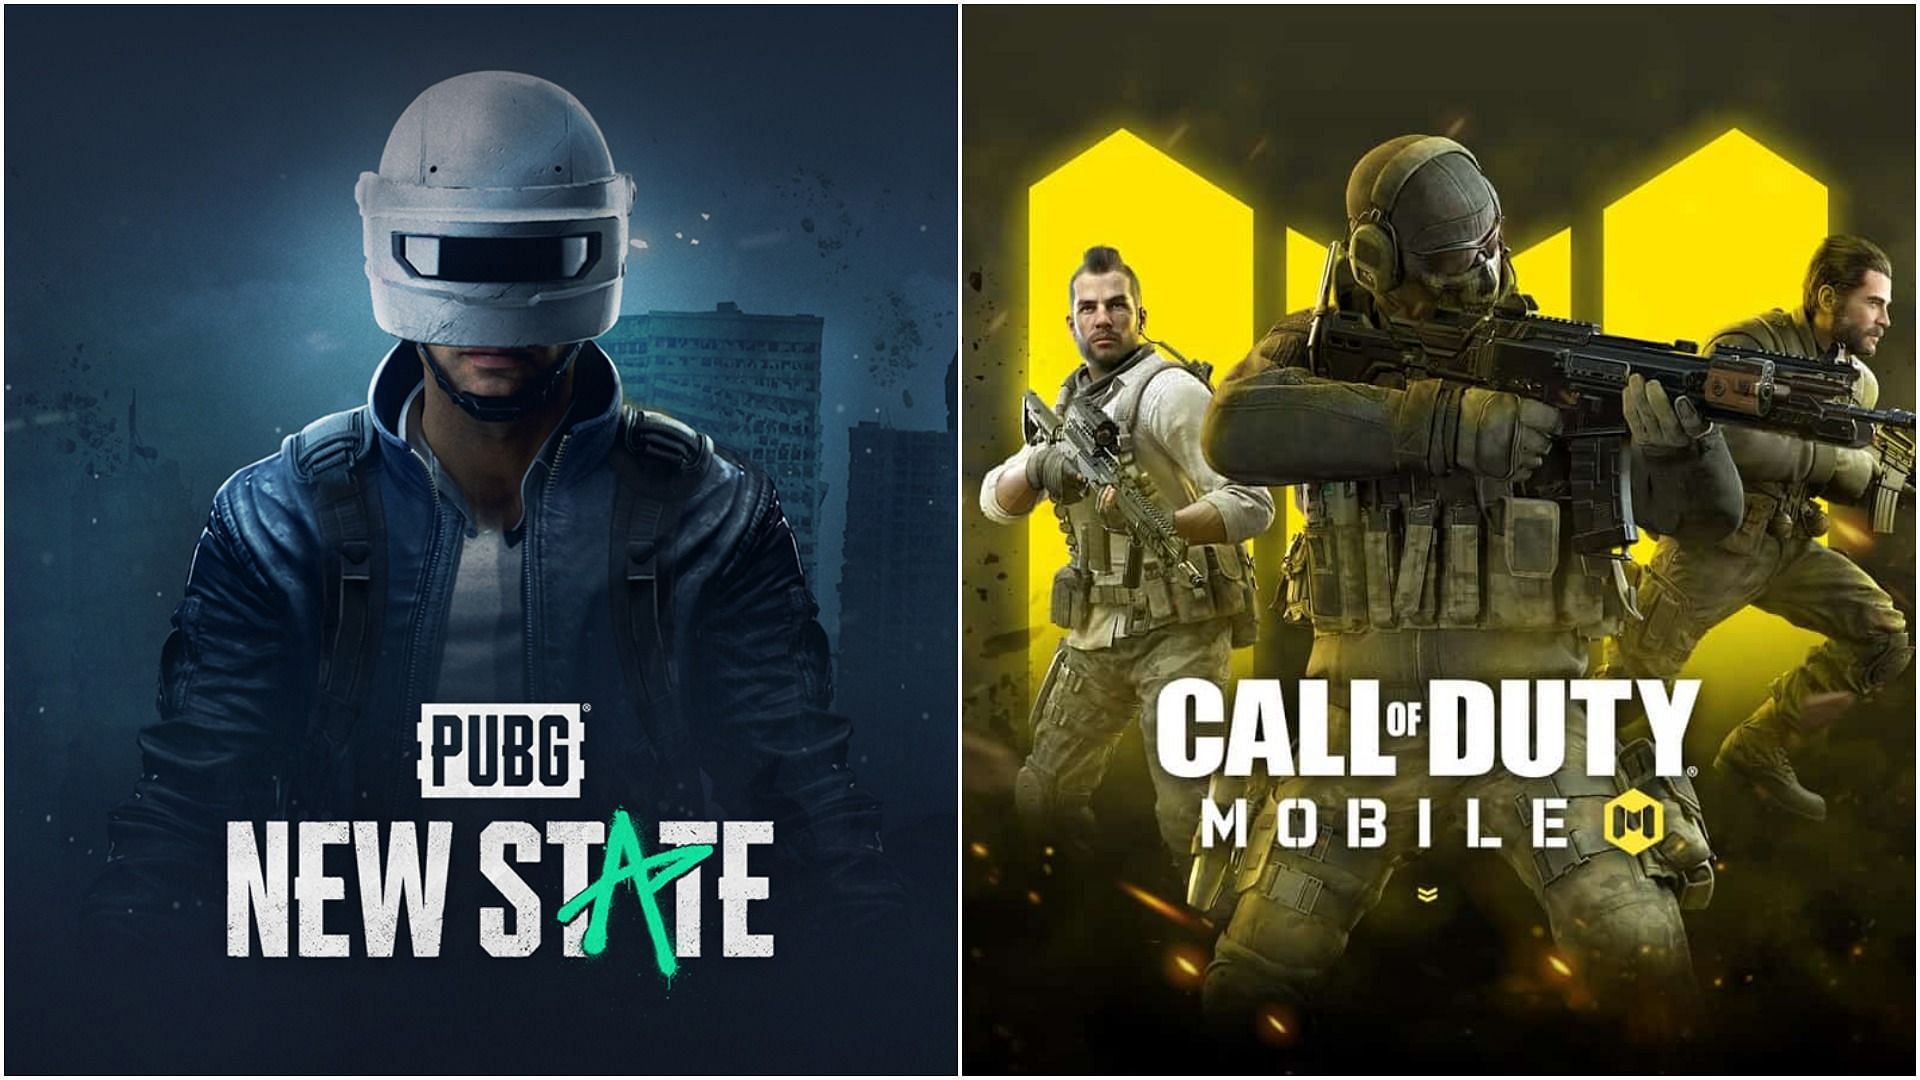 Key differences between PUBG New State and COD Mobile (Images via Krafton and Activision)